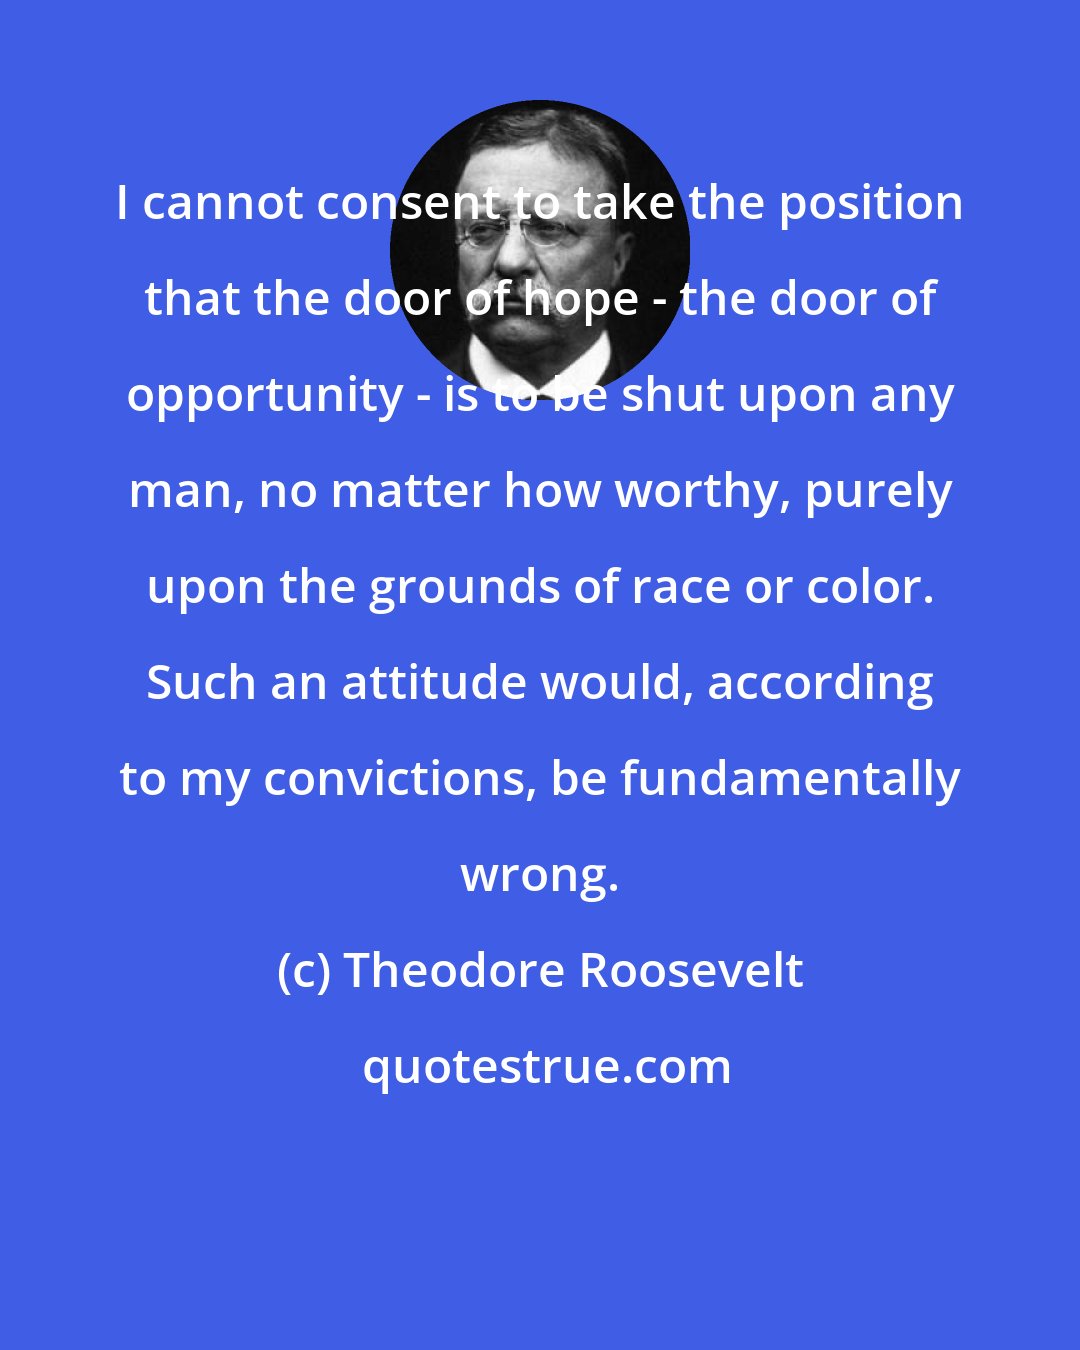 Theodore Roosevelt: I cannot consent to take the position that the door of hope - the door of opportunity - is to be shut upon any man, no matter how worthy, purely upon the grounds of race or color. Such an attitude would, according to my convictions, be fundamentally wrong.